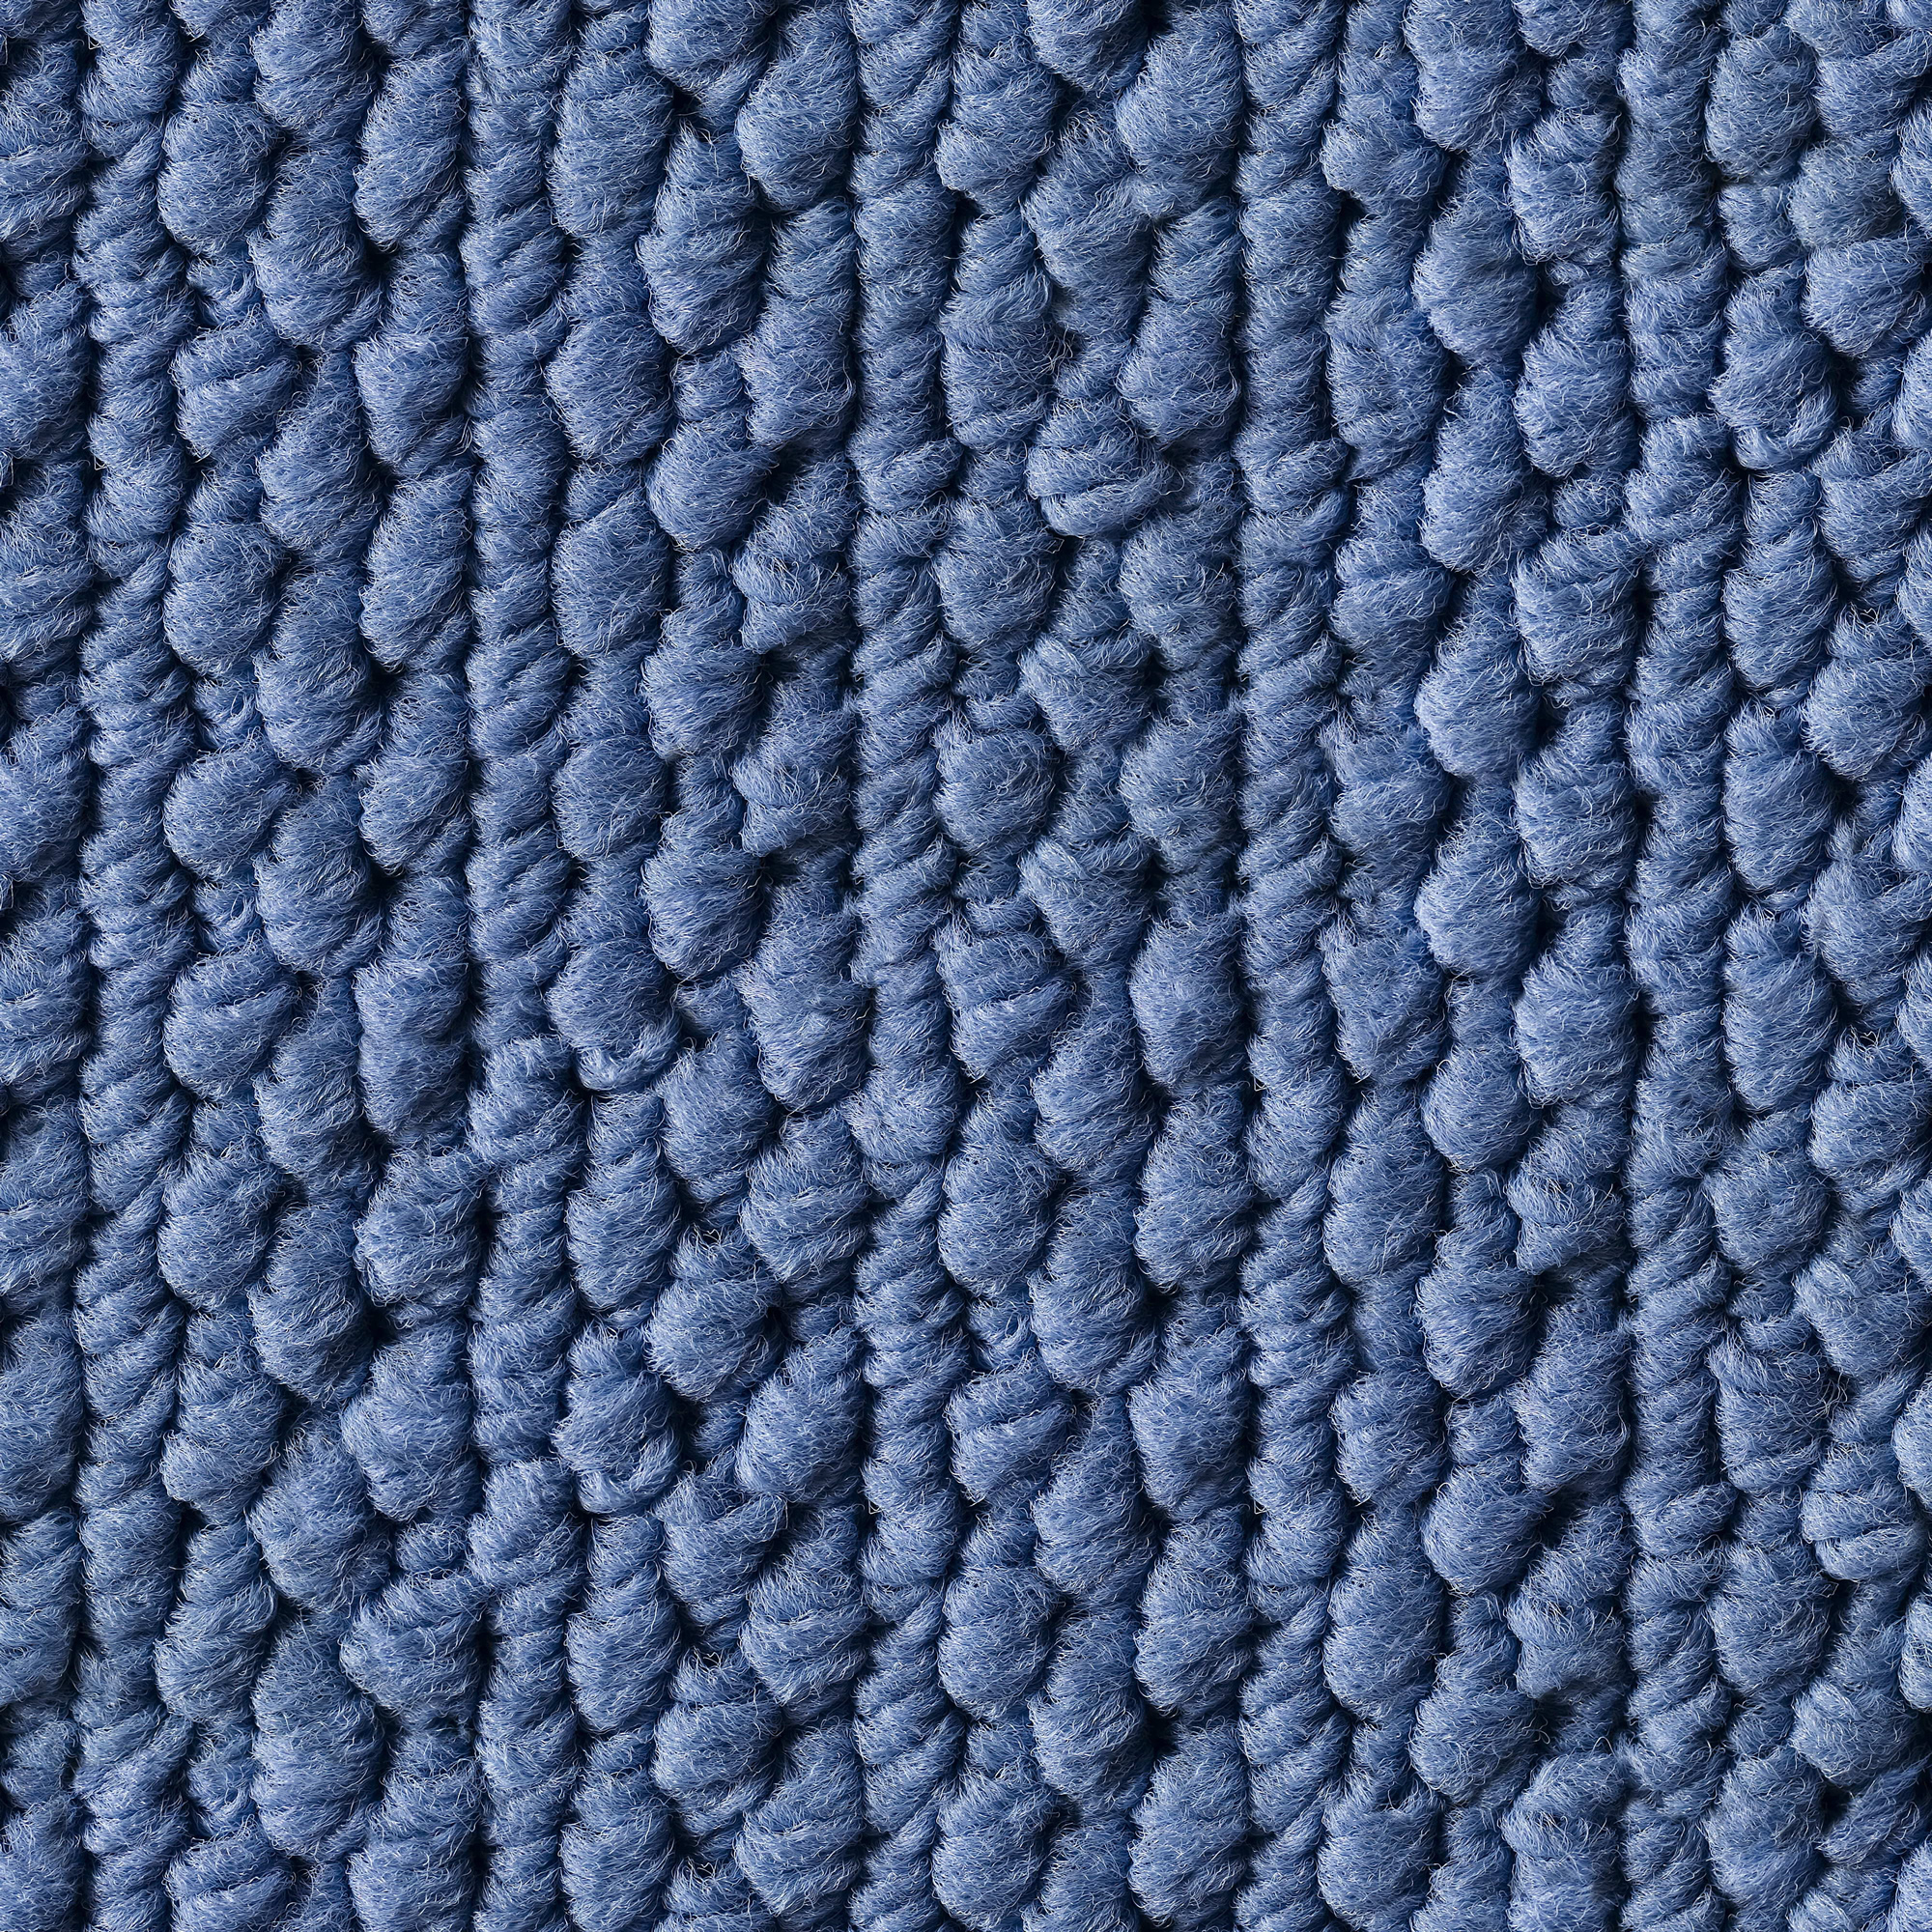 Knitted fabric, knit, texture, photo, background, knitted texture